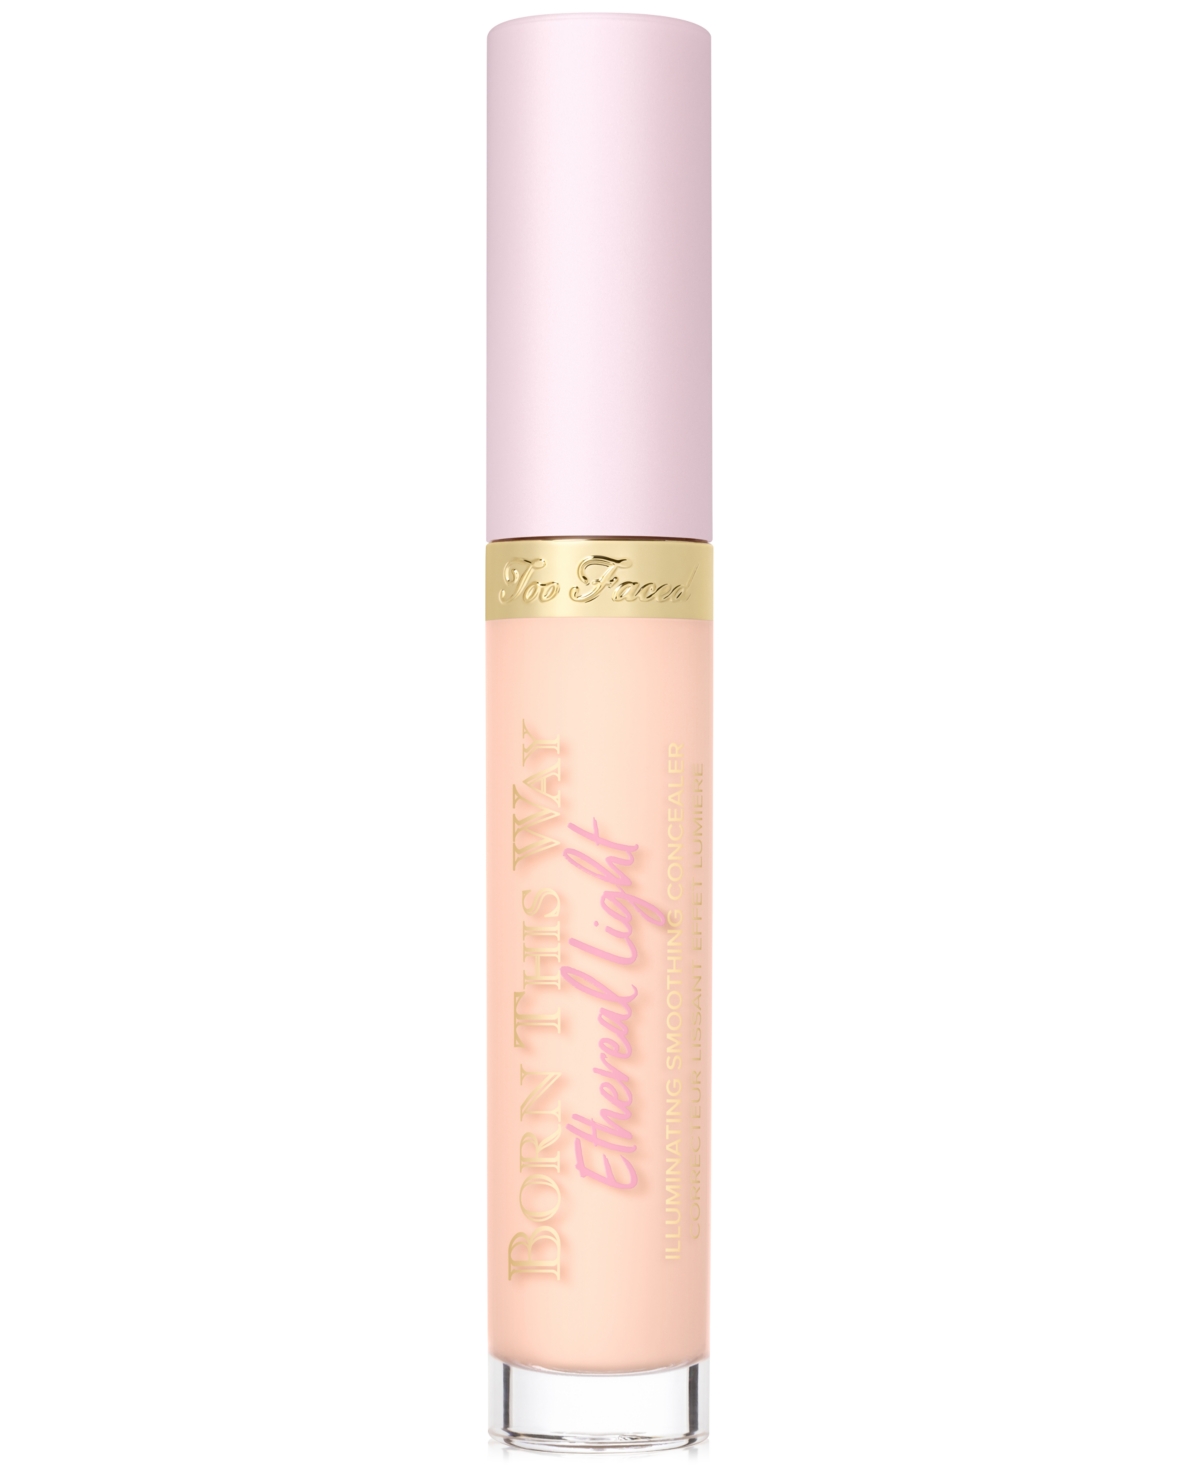 Too Faced Born This Way Ethereal Light Illuminating Smoothing Concealer In Oatmeal - Fair With Rosy Undertones